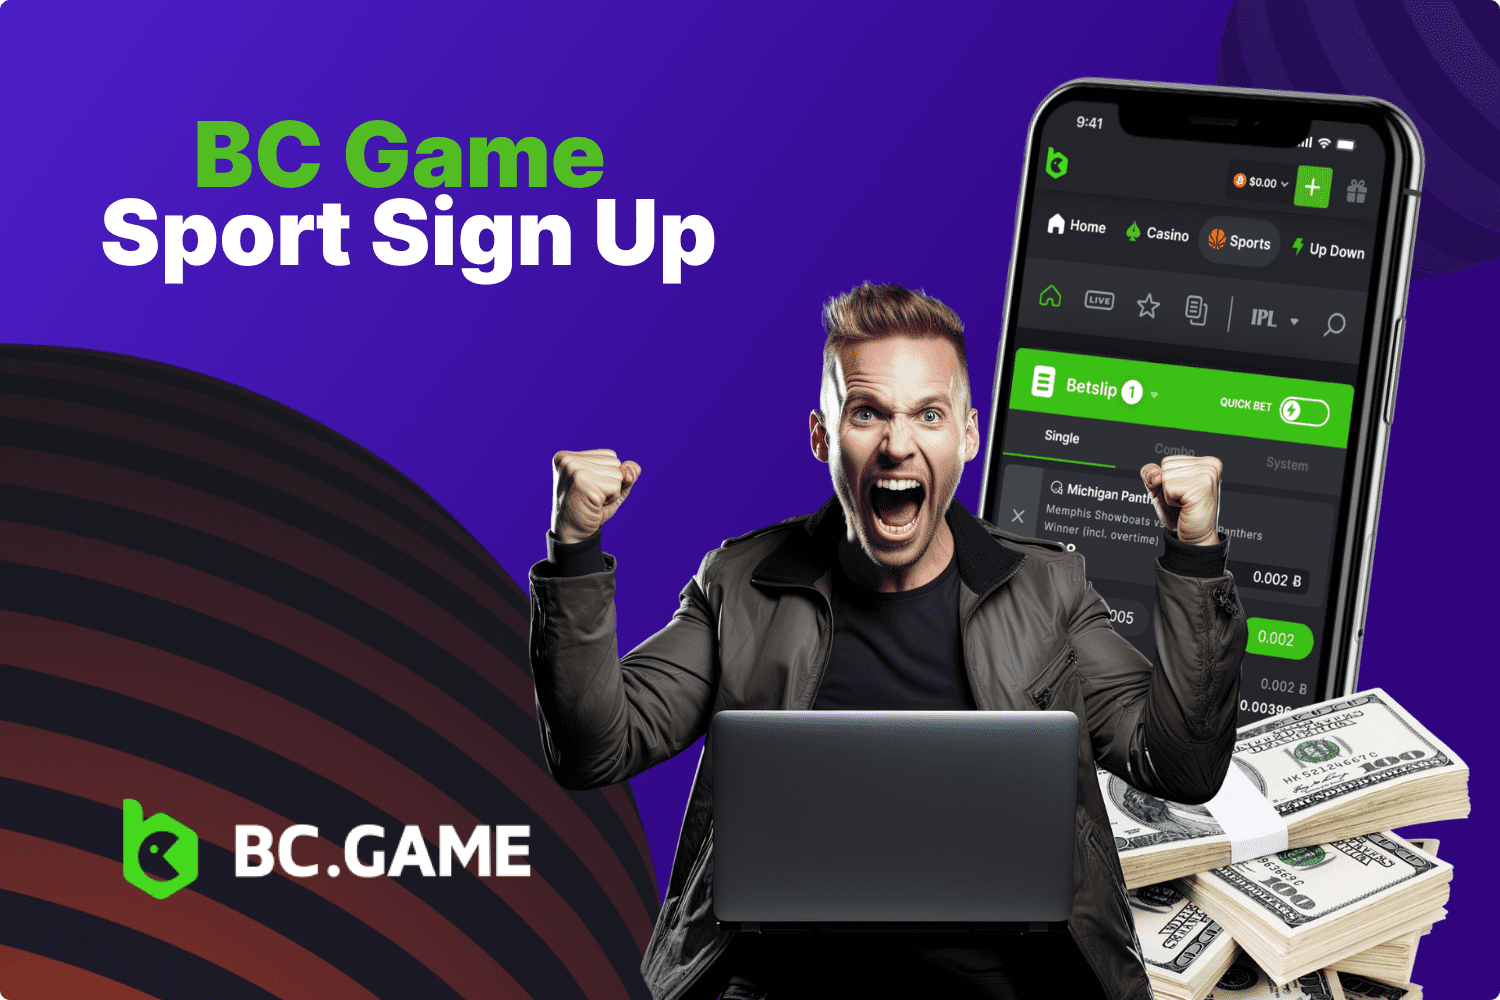 Who Else Wants To Be Successful With BC.Game Casino and Sportsbook in 2021